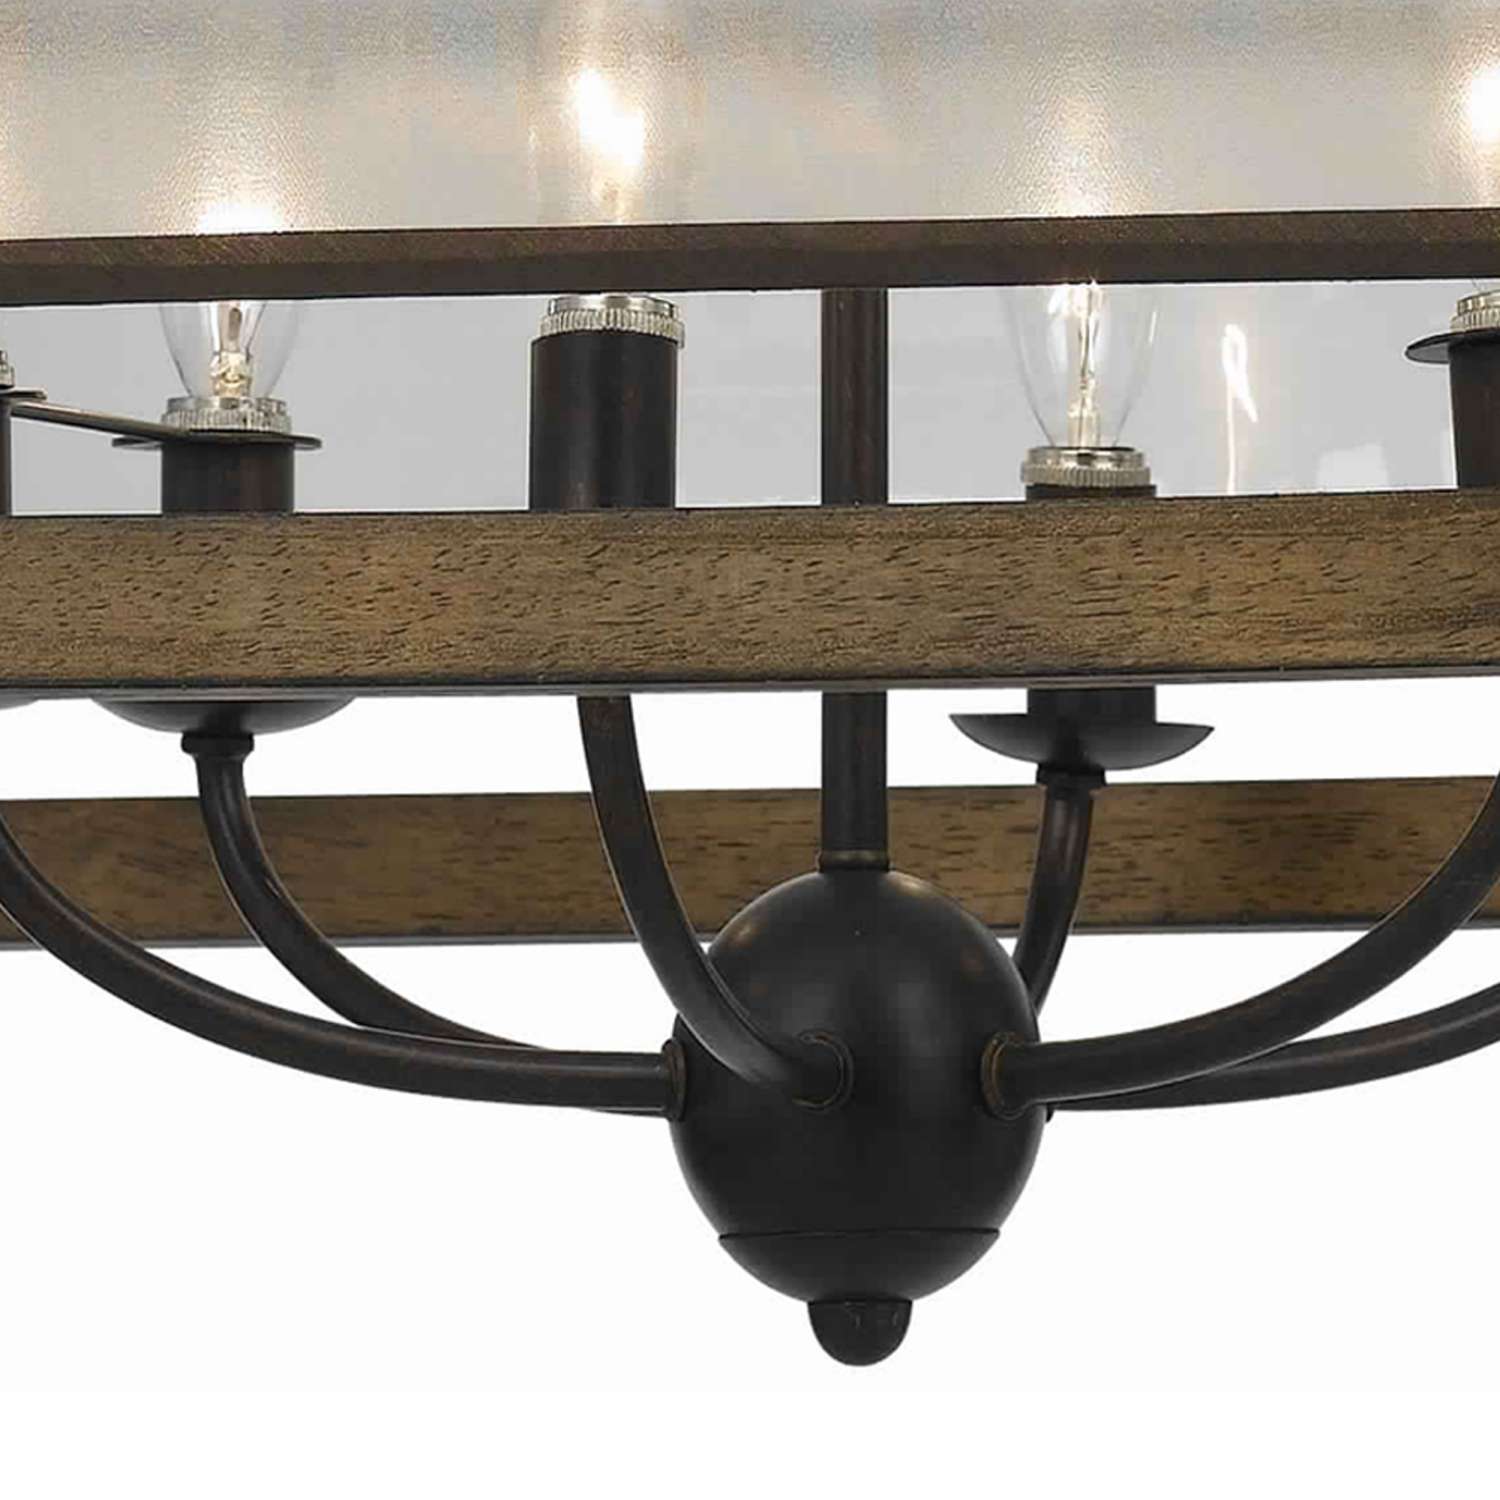 6 Bulb Square Chandelier With Wooden Frame And Organza Striped Shade, Brown By Benzara